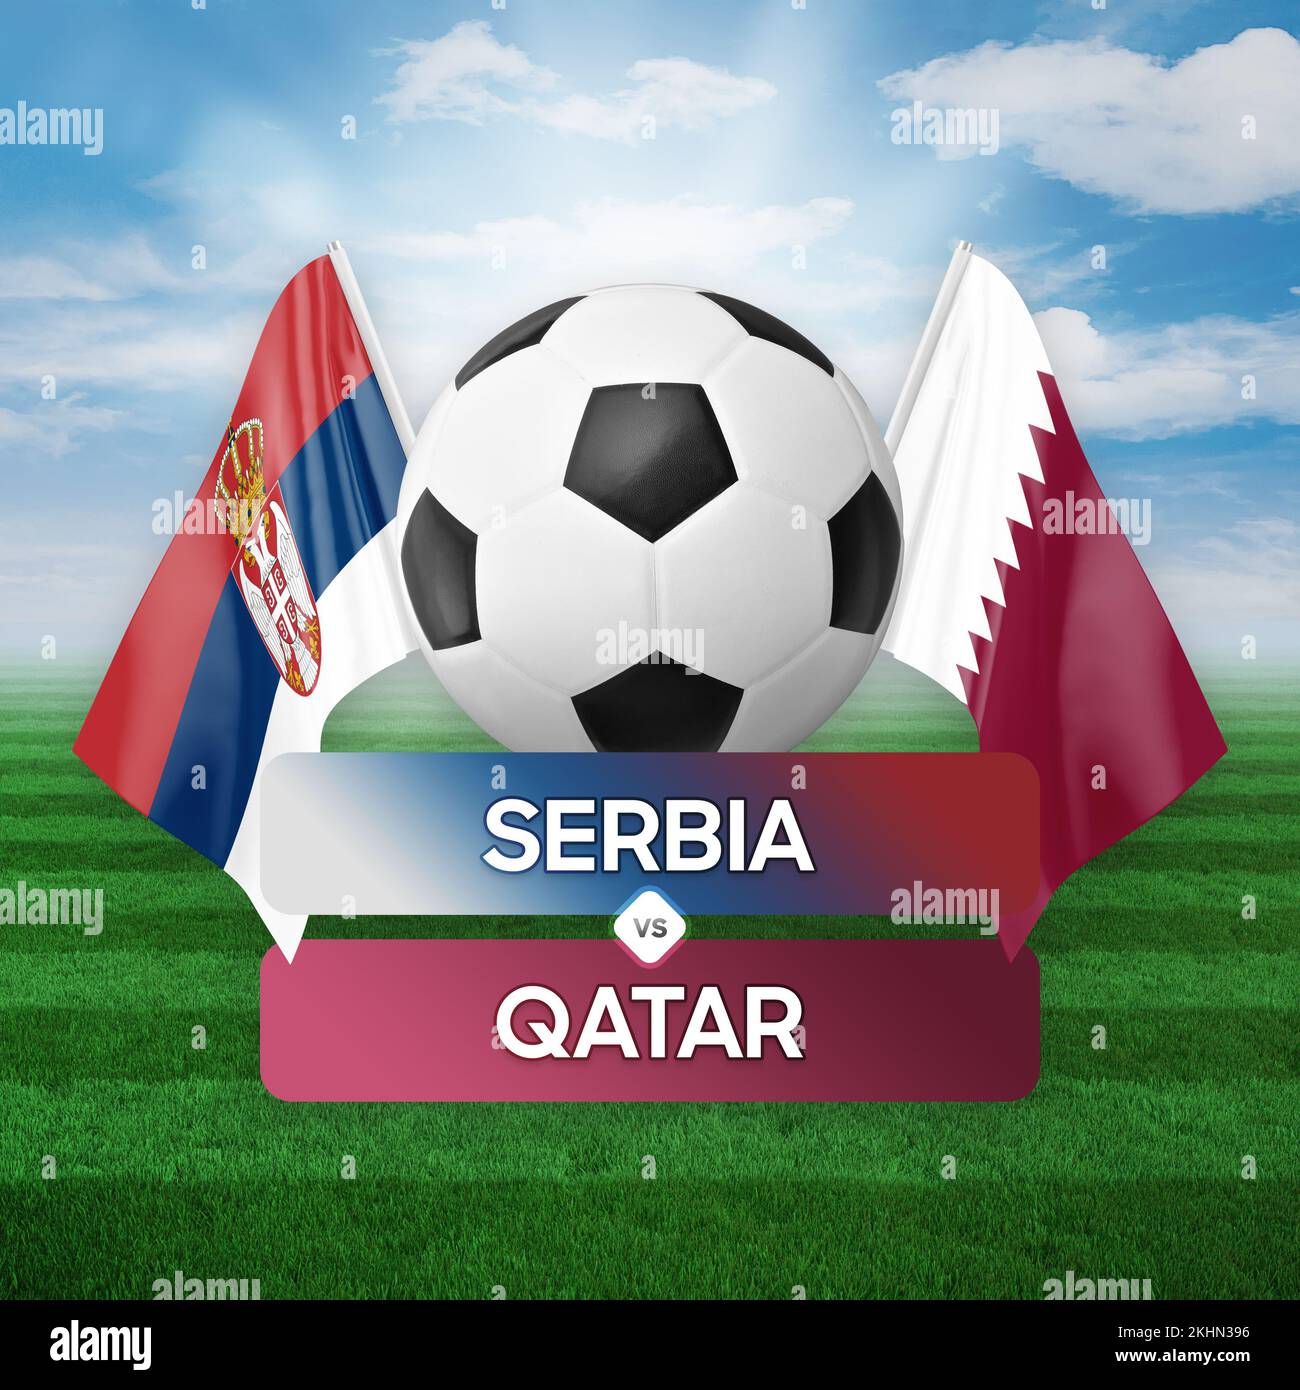 Serbia vs Qatar national teams soccer football match competition concept. Stock Photo